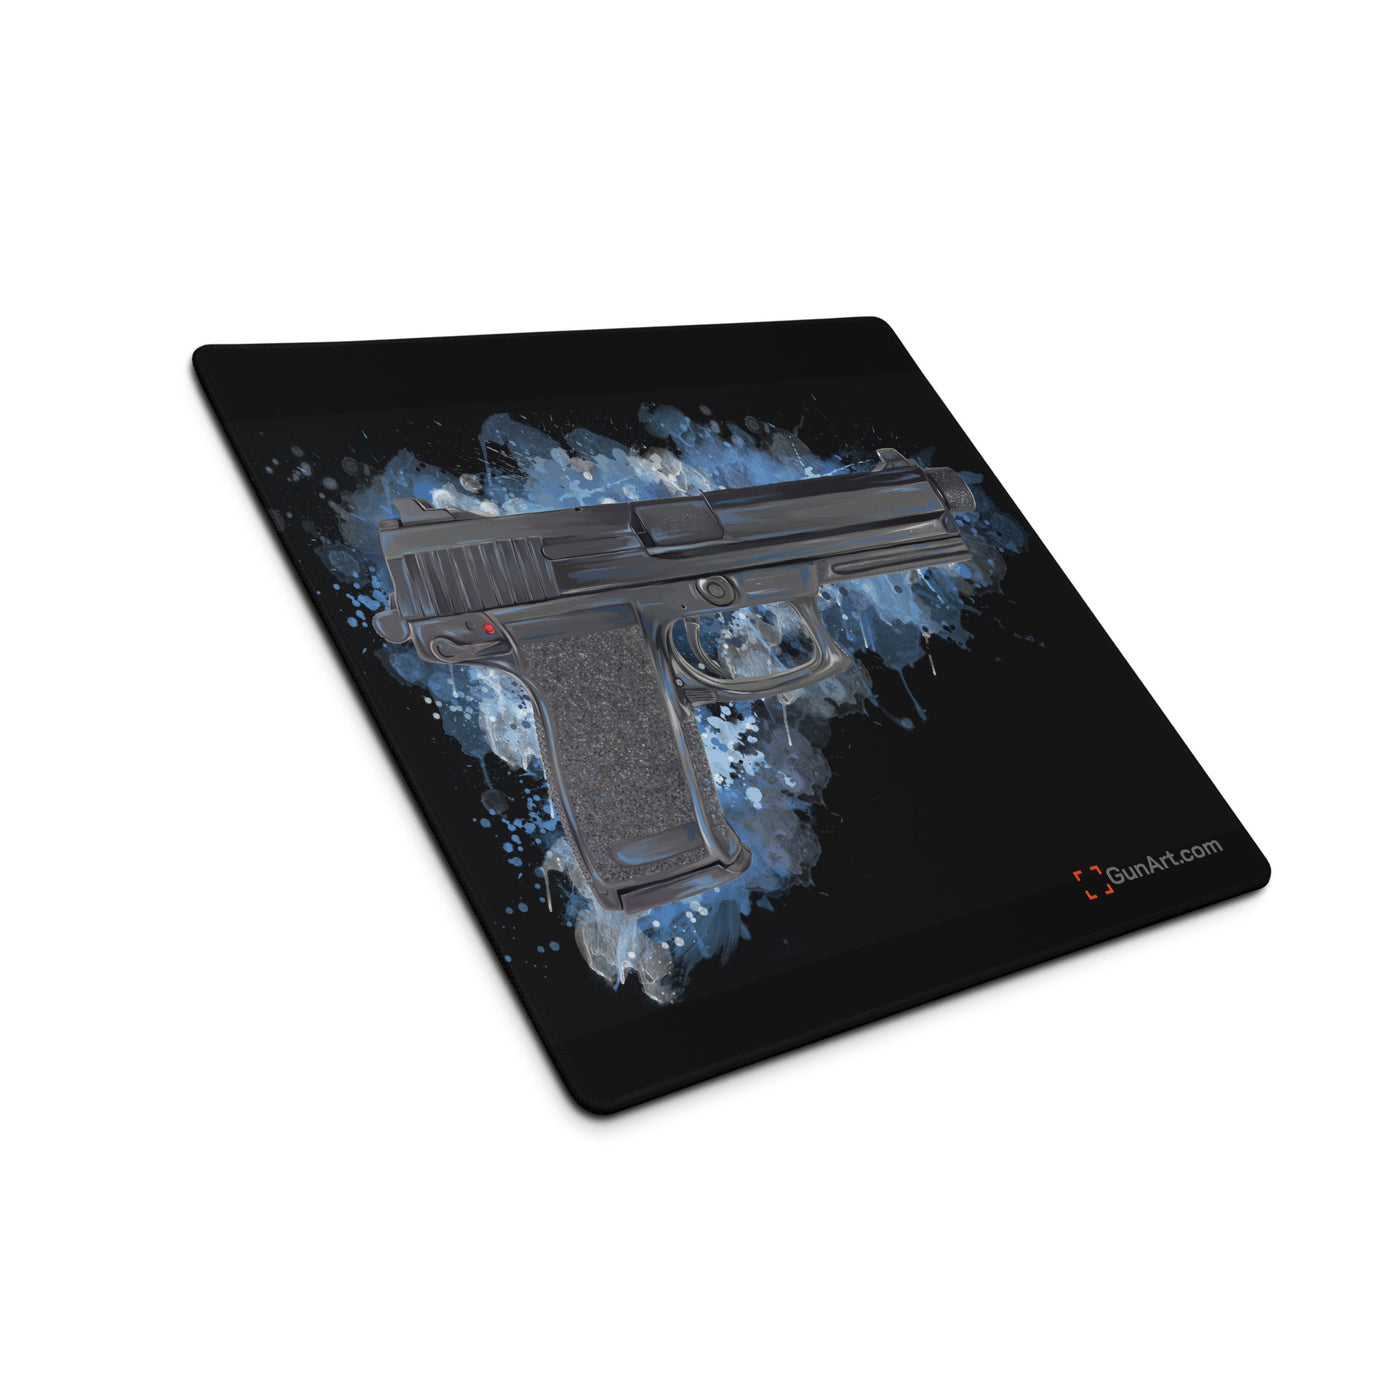 Tactical .45 ACP Poly Pistol Gaming Mouse Pad - Black Background